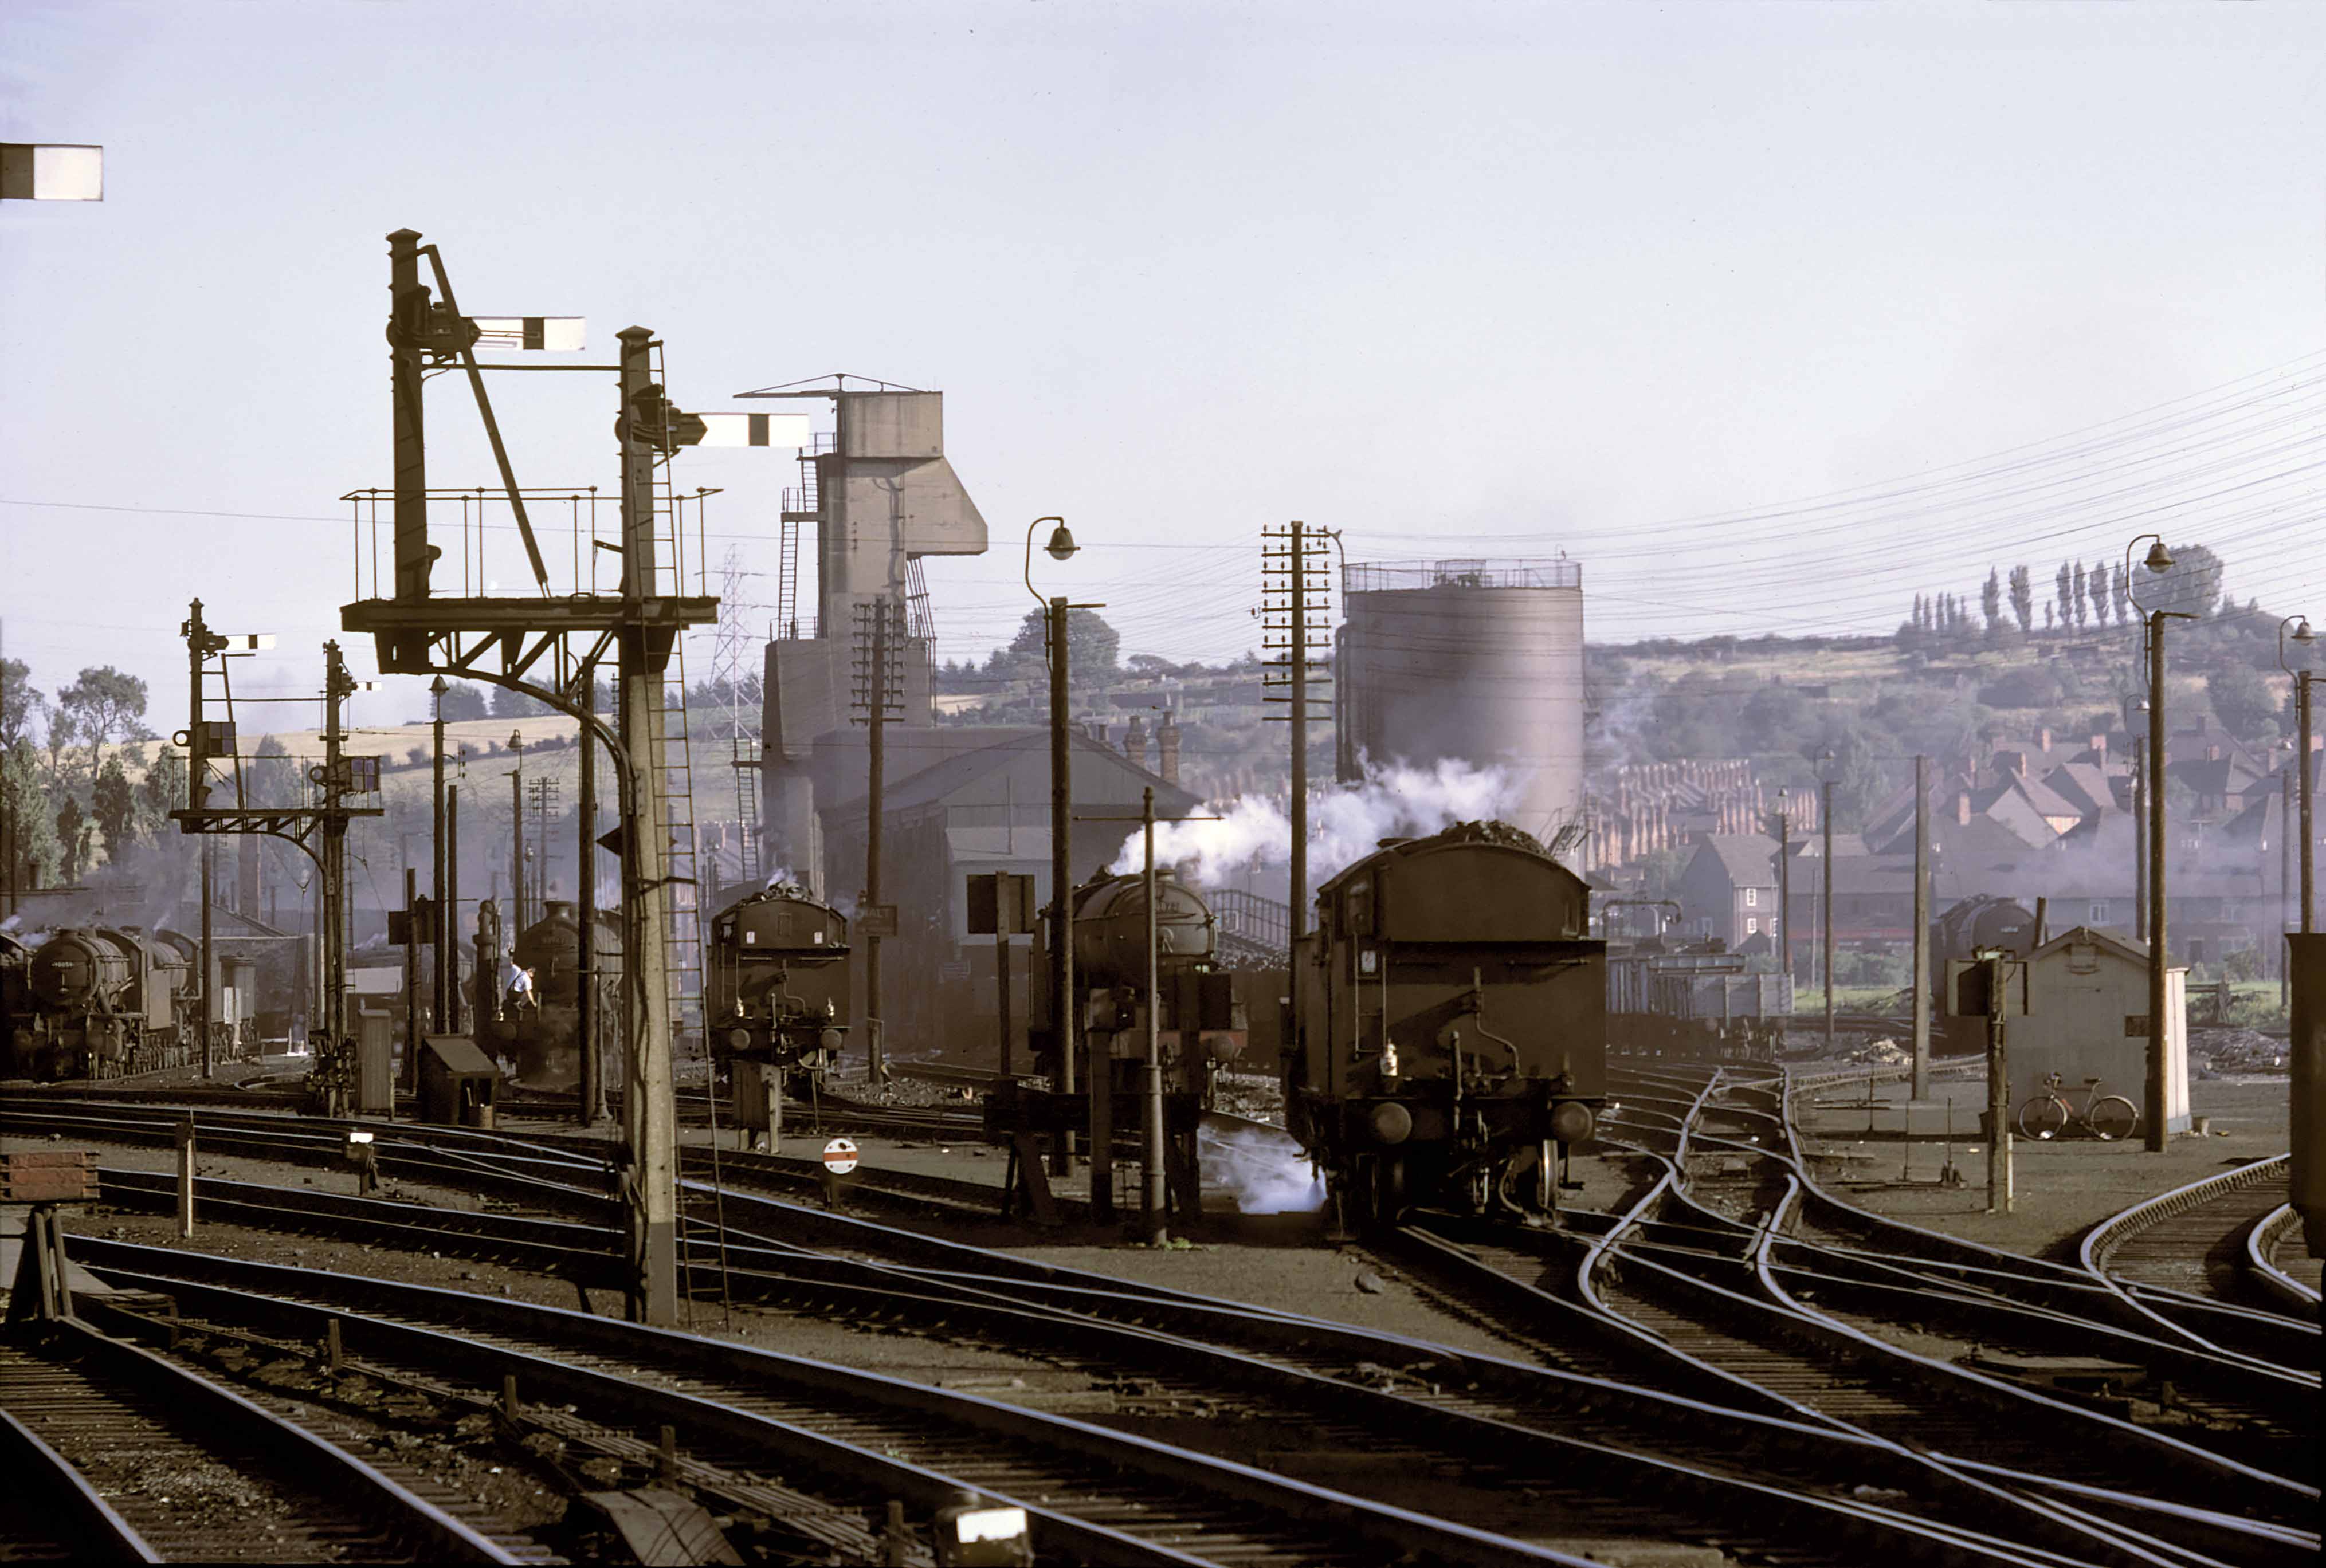 Looking south west from the north end of the down platform on 31st August 1961. Prominent on the skyline is the tall mechanical coaling plant, built of reinforced concrete in 1936-37. Wagons of coal were hoisted in turn to the top and emptied into an internal hopper above the tracks. Locomotives were placed underneath to have their tenders and bunkers replenished. To its right is the tank of the water treatment plant, a little older than the coaling plant, which supplied water for locomotives. The treatment inhibited the formation of scale inside steam locomotive boilers. The cabin near the right of the photograph was the Pilots Cabin, a messroom where the local men who were on main line standby pilot duty would await the call to action, and visiting locomotive crews could rest and make a brew while waiting for their return working. The bike probably belonged to caller-up and odd-job man Pete Ballaam, who would often be sent out to get pork pies from Watkin's Pork Butchers in the town for visiting crews - especially 'Cockneys' as they were referred to (from King's Cross depot) who relished this local speciality. Watkin & Sons closed in 1990 after 78 years in business. The 2 loops near the exit from the loco where prepared engines were placed was called 'London road'. There was a phone there to the North Box to tell the 'bobby' when you were ready to leave the shed. Locomotives of types WD (90059), B1, O2, L1, and V2 (60872 King's Own Yorkshire Light Infantry) can be seen, and there is a fully-coaled A2/3 class pacific loco in the distance, beyond the Pilots Cabin. This is probably the 'standby pilot', or 'main line pilot', an express locomotive which was kept ready in case of a breakdown on the main line. It is standing on one of the lines which was part of the Grantham shed triangle (known to local railwaymen as the angle), so that it could be turned quickly (taken round the 'angle) if required to assist with a southbound train. Photograph by Cedric A. Clayson, © John Clayson 